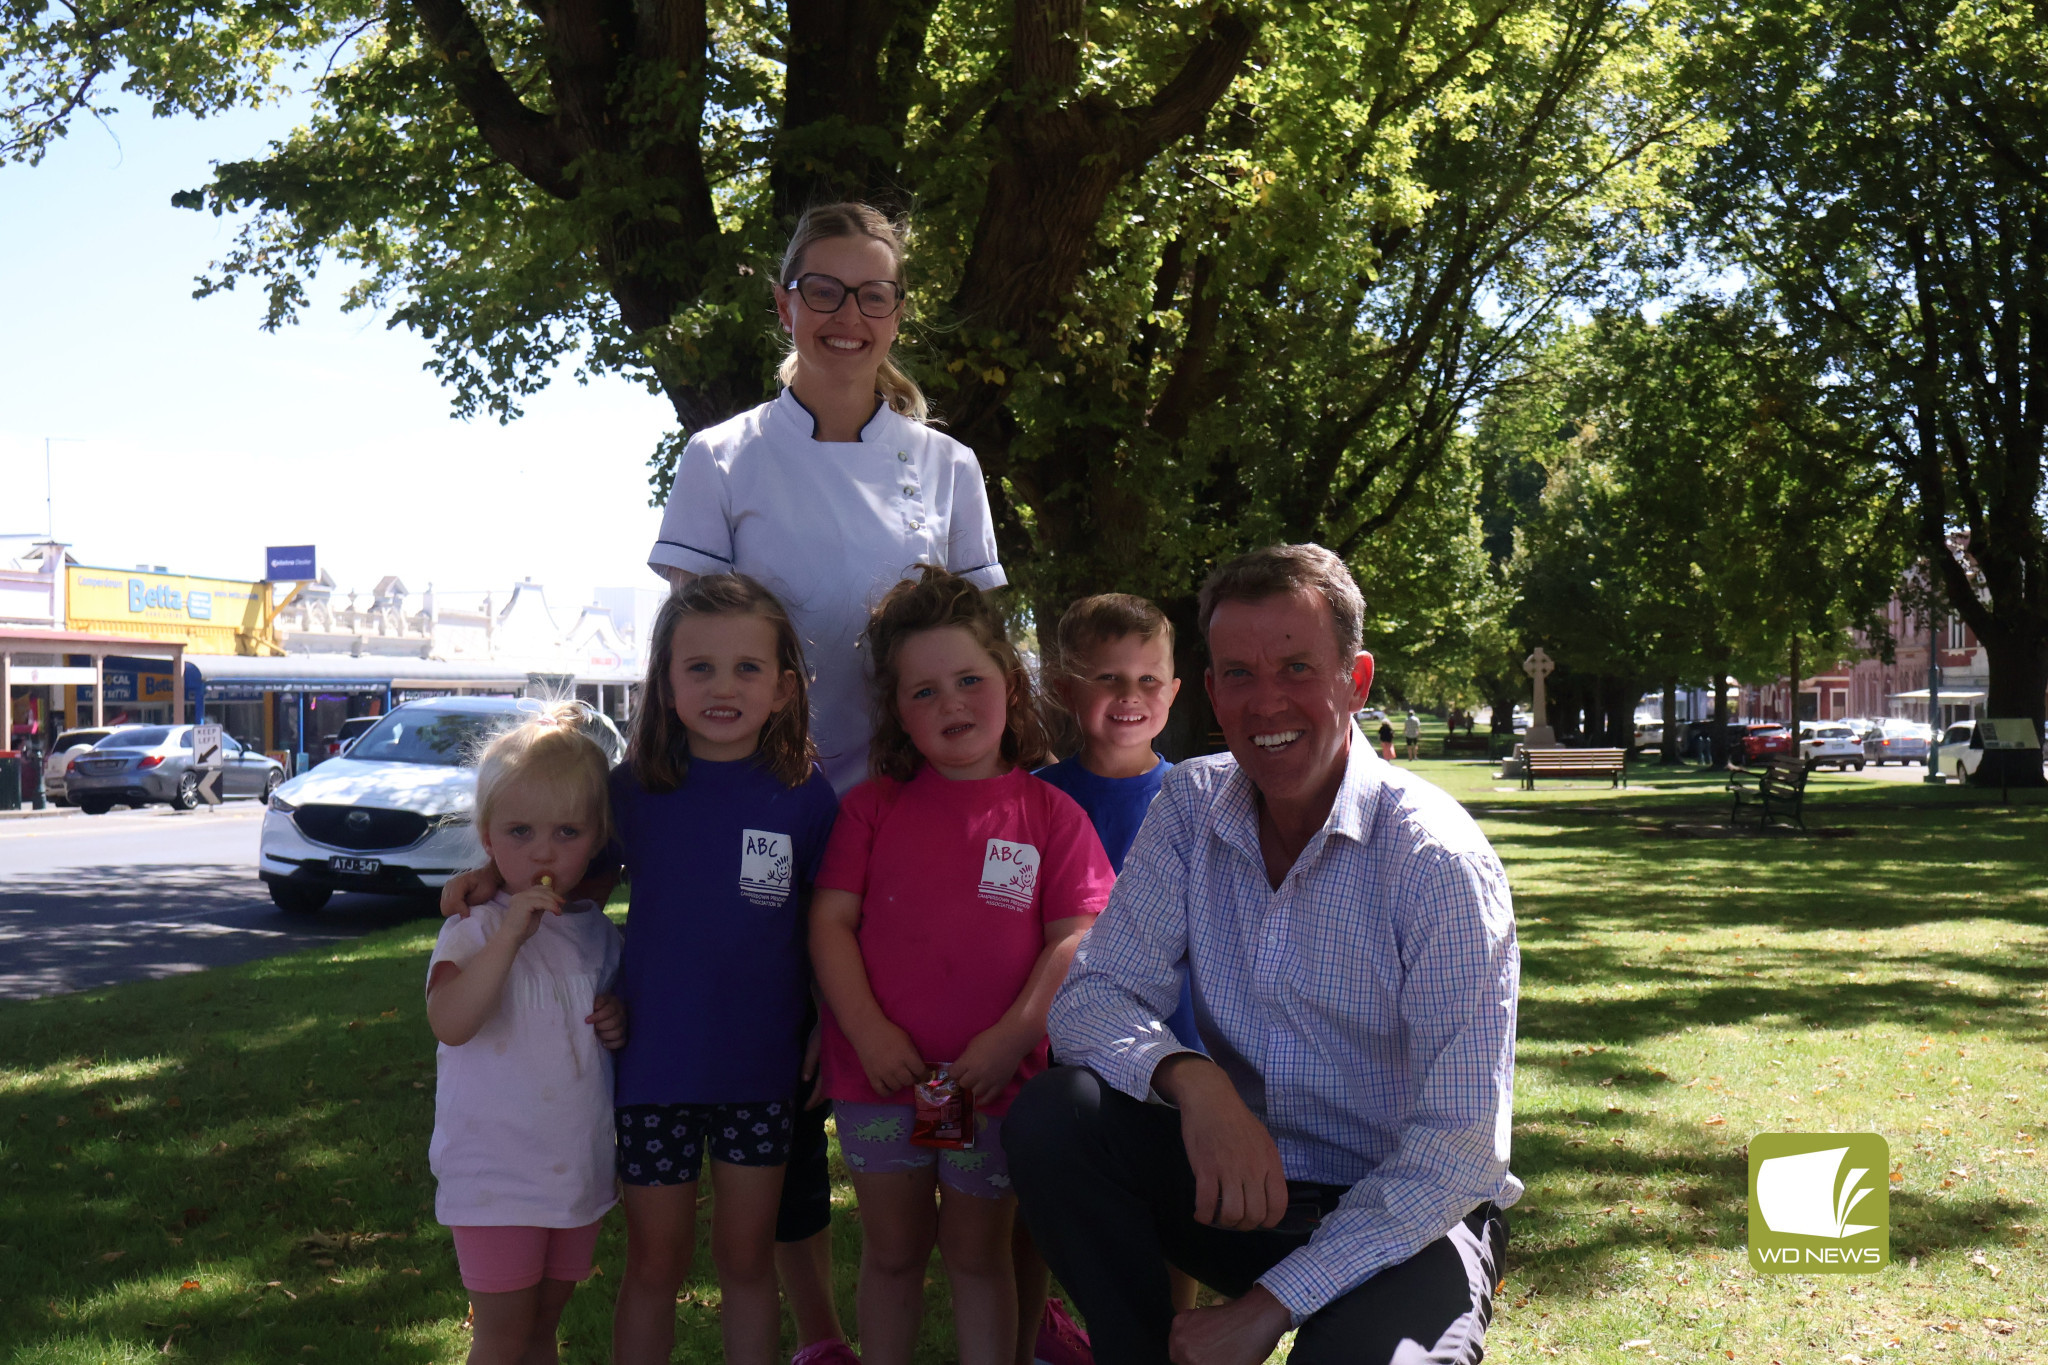 Paying a visit: Member for Wannon Dan Tehan MP listened to the concerns of Camperdown residents on Tuesday as part of his Listening Posts.